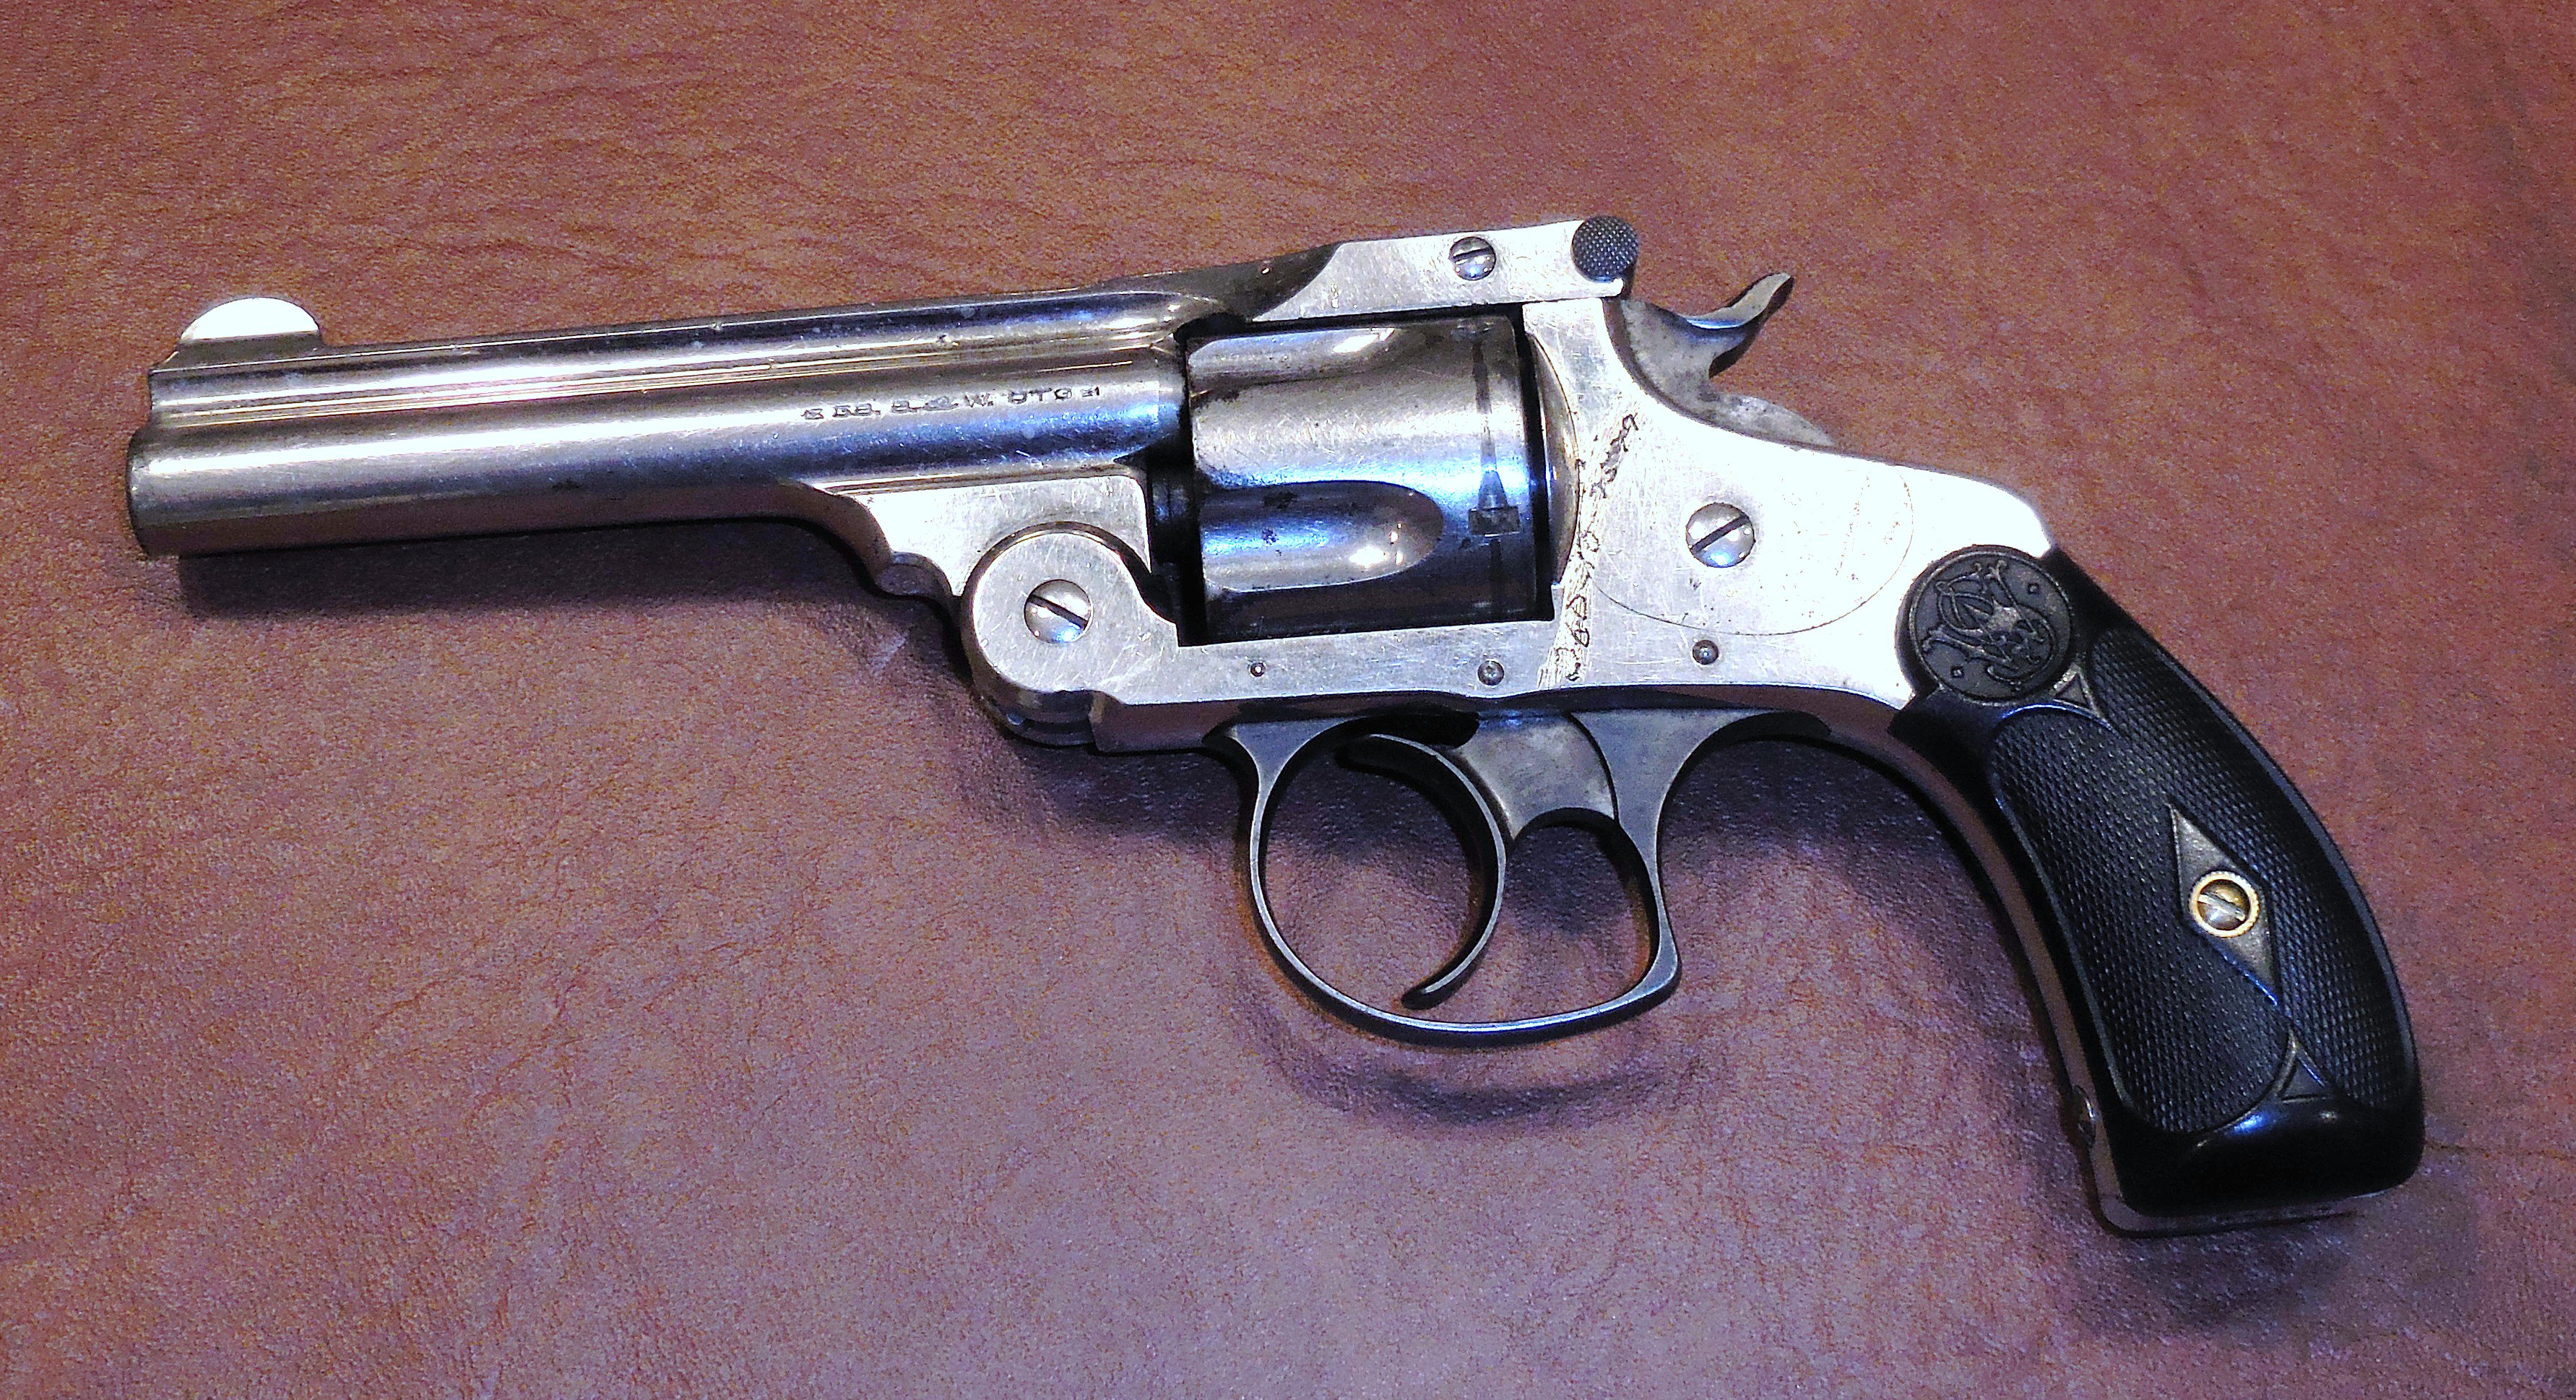 smith and wesson model 39 serial numbers